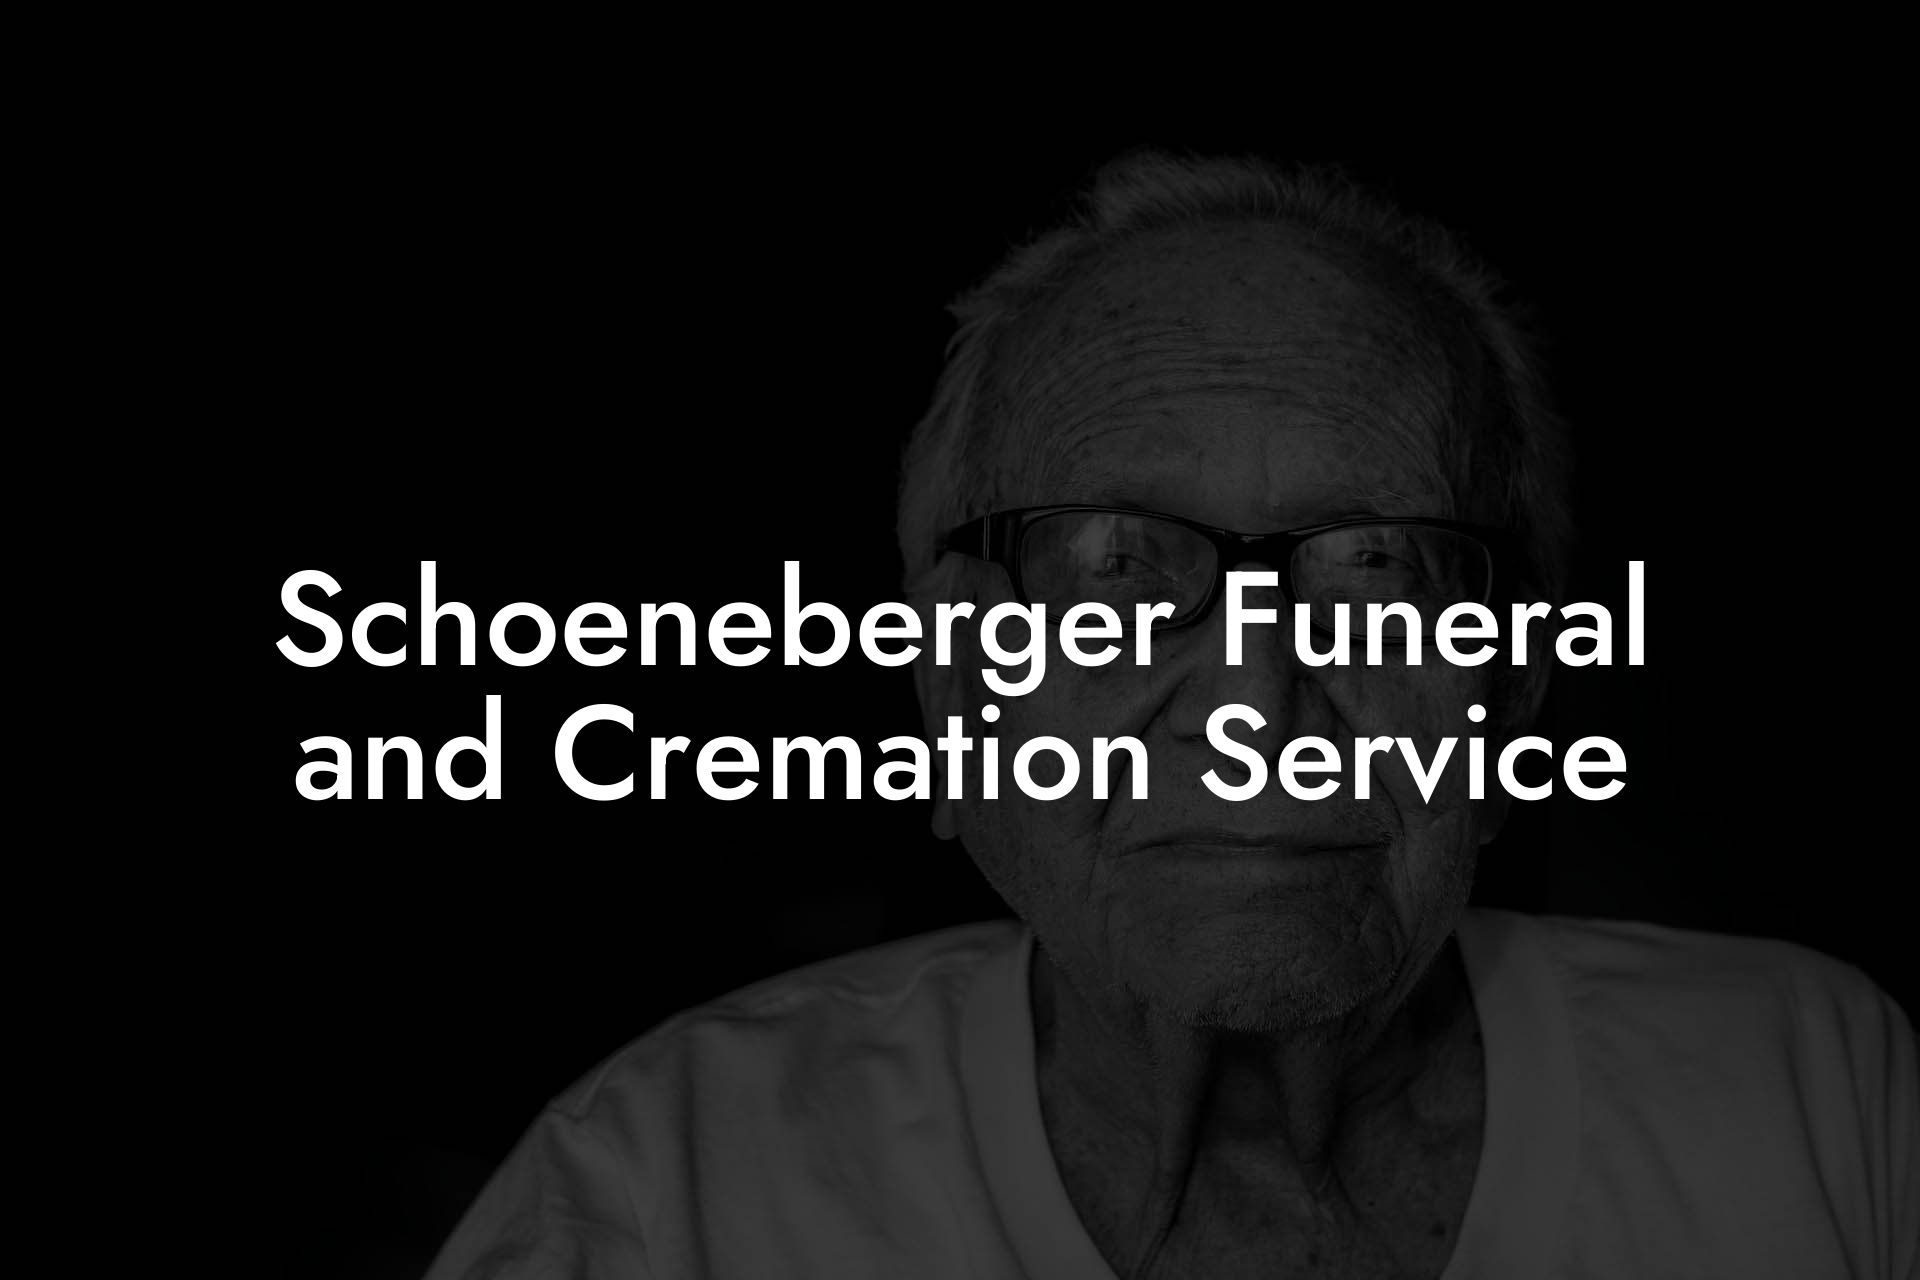 Schoeneberger Funeral and Cremation Service